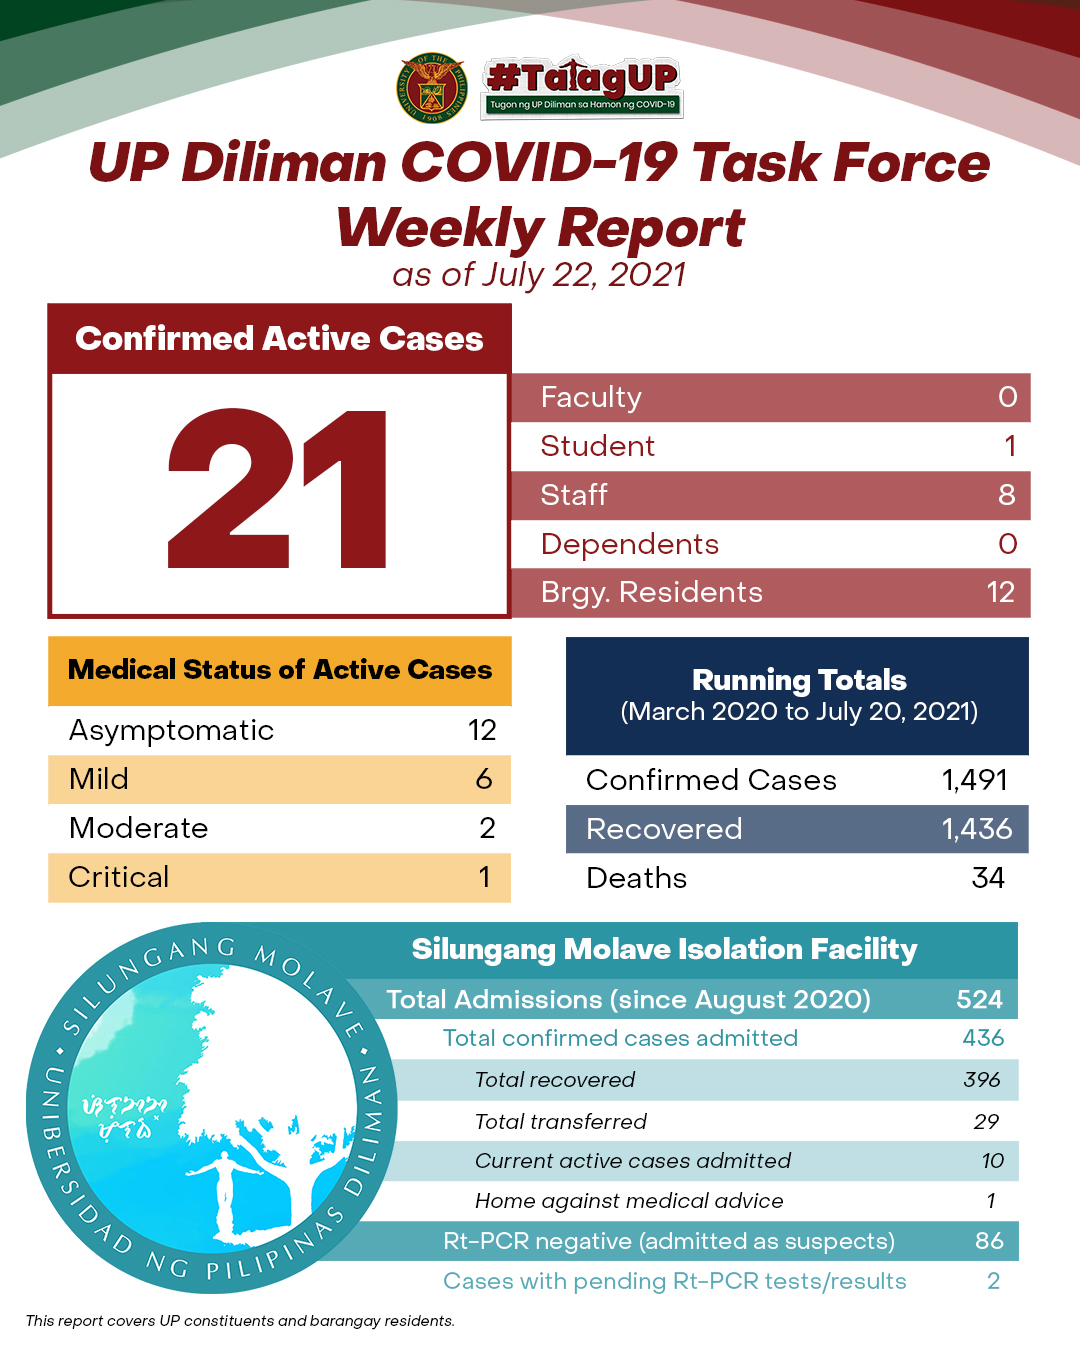 UP Diliman COVID-19 Task Force Weekly Report as of July 22, 2021